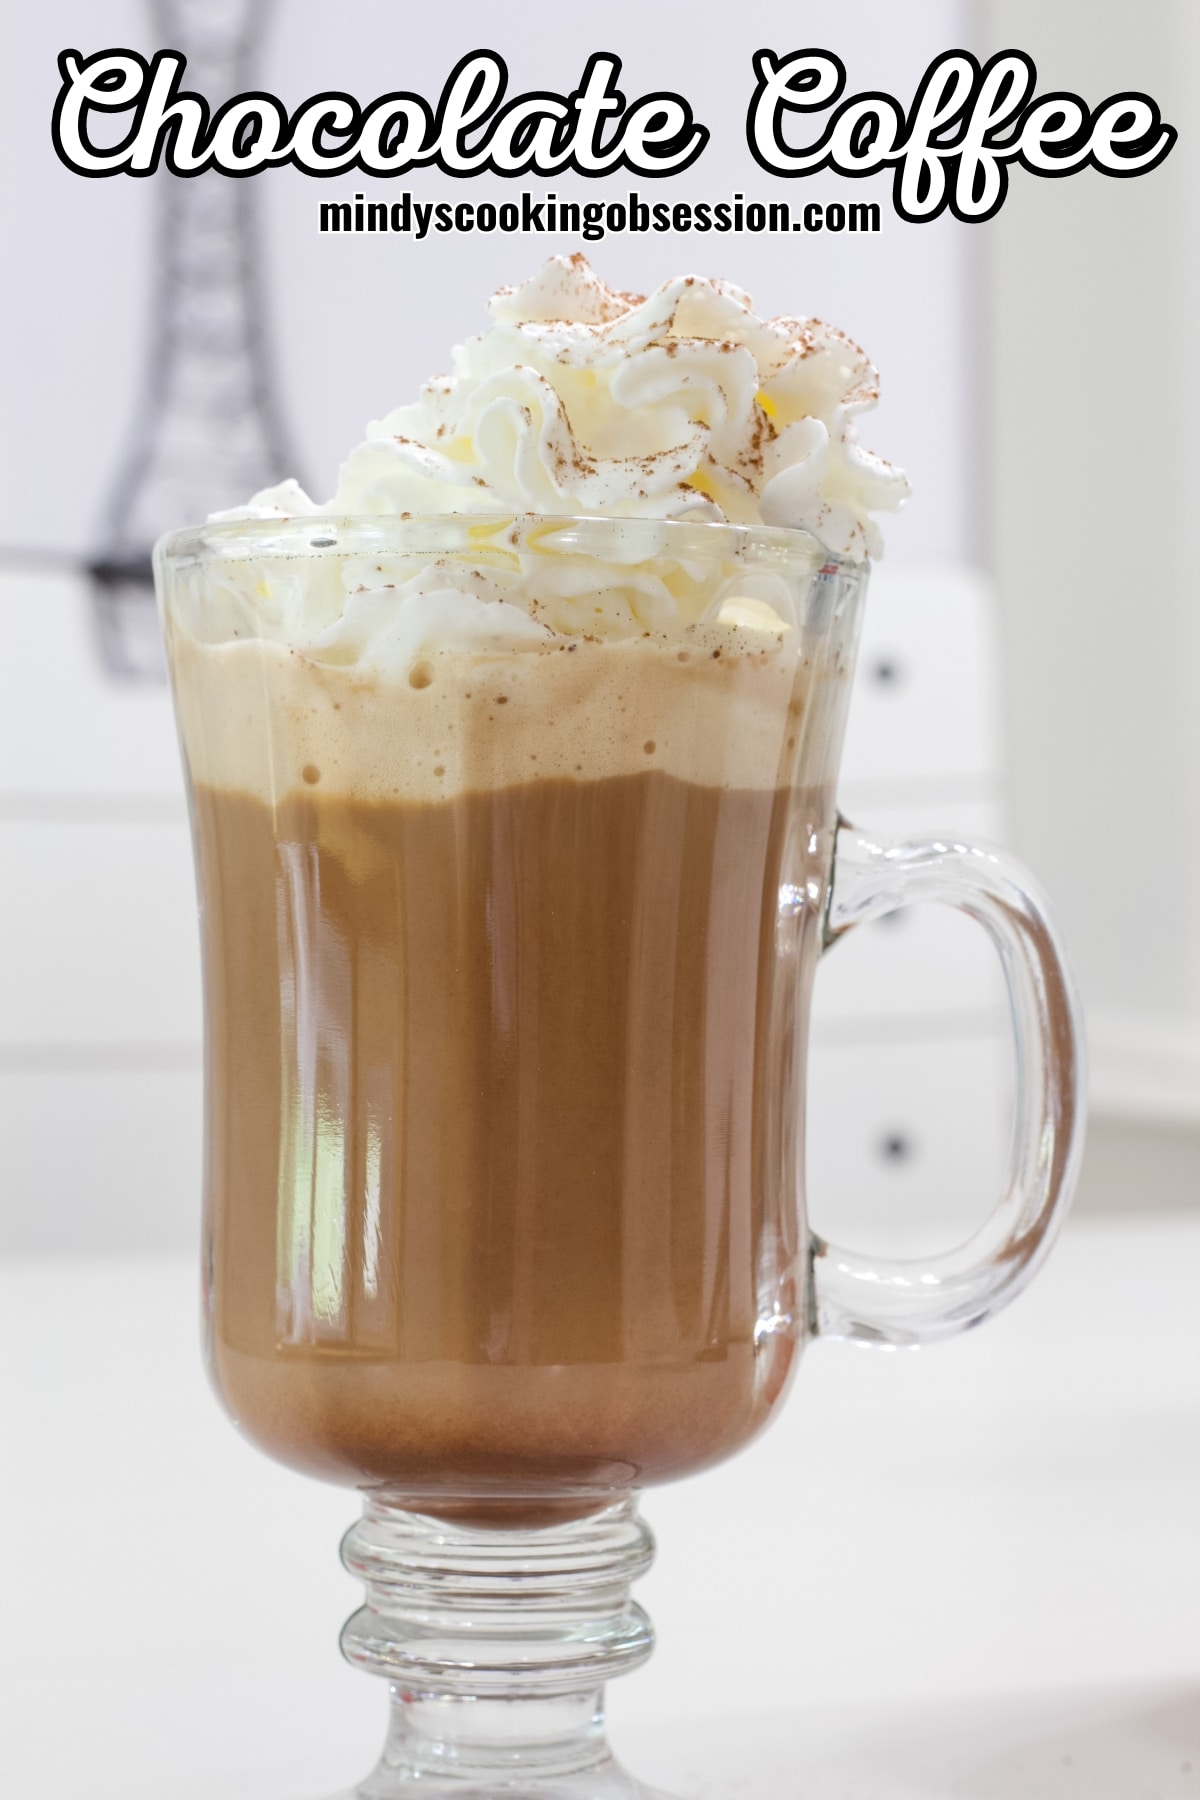 Easy Chocolate Coffee Recipe (Hot Cafe Mocha) - Skip the lines at high end coffee shops and make easy peasy specialty coffee drinks at home! via @mindyscookingobsession